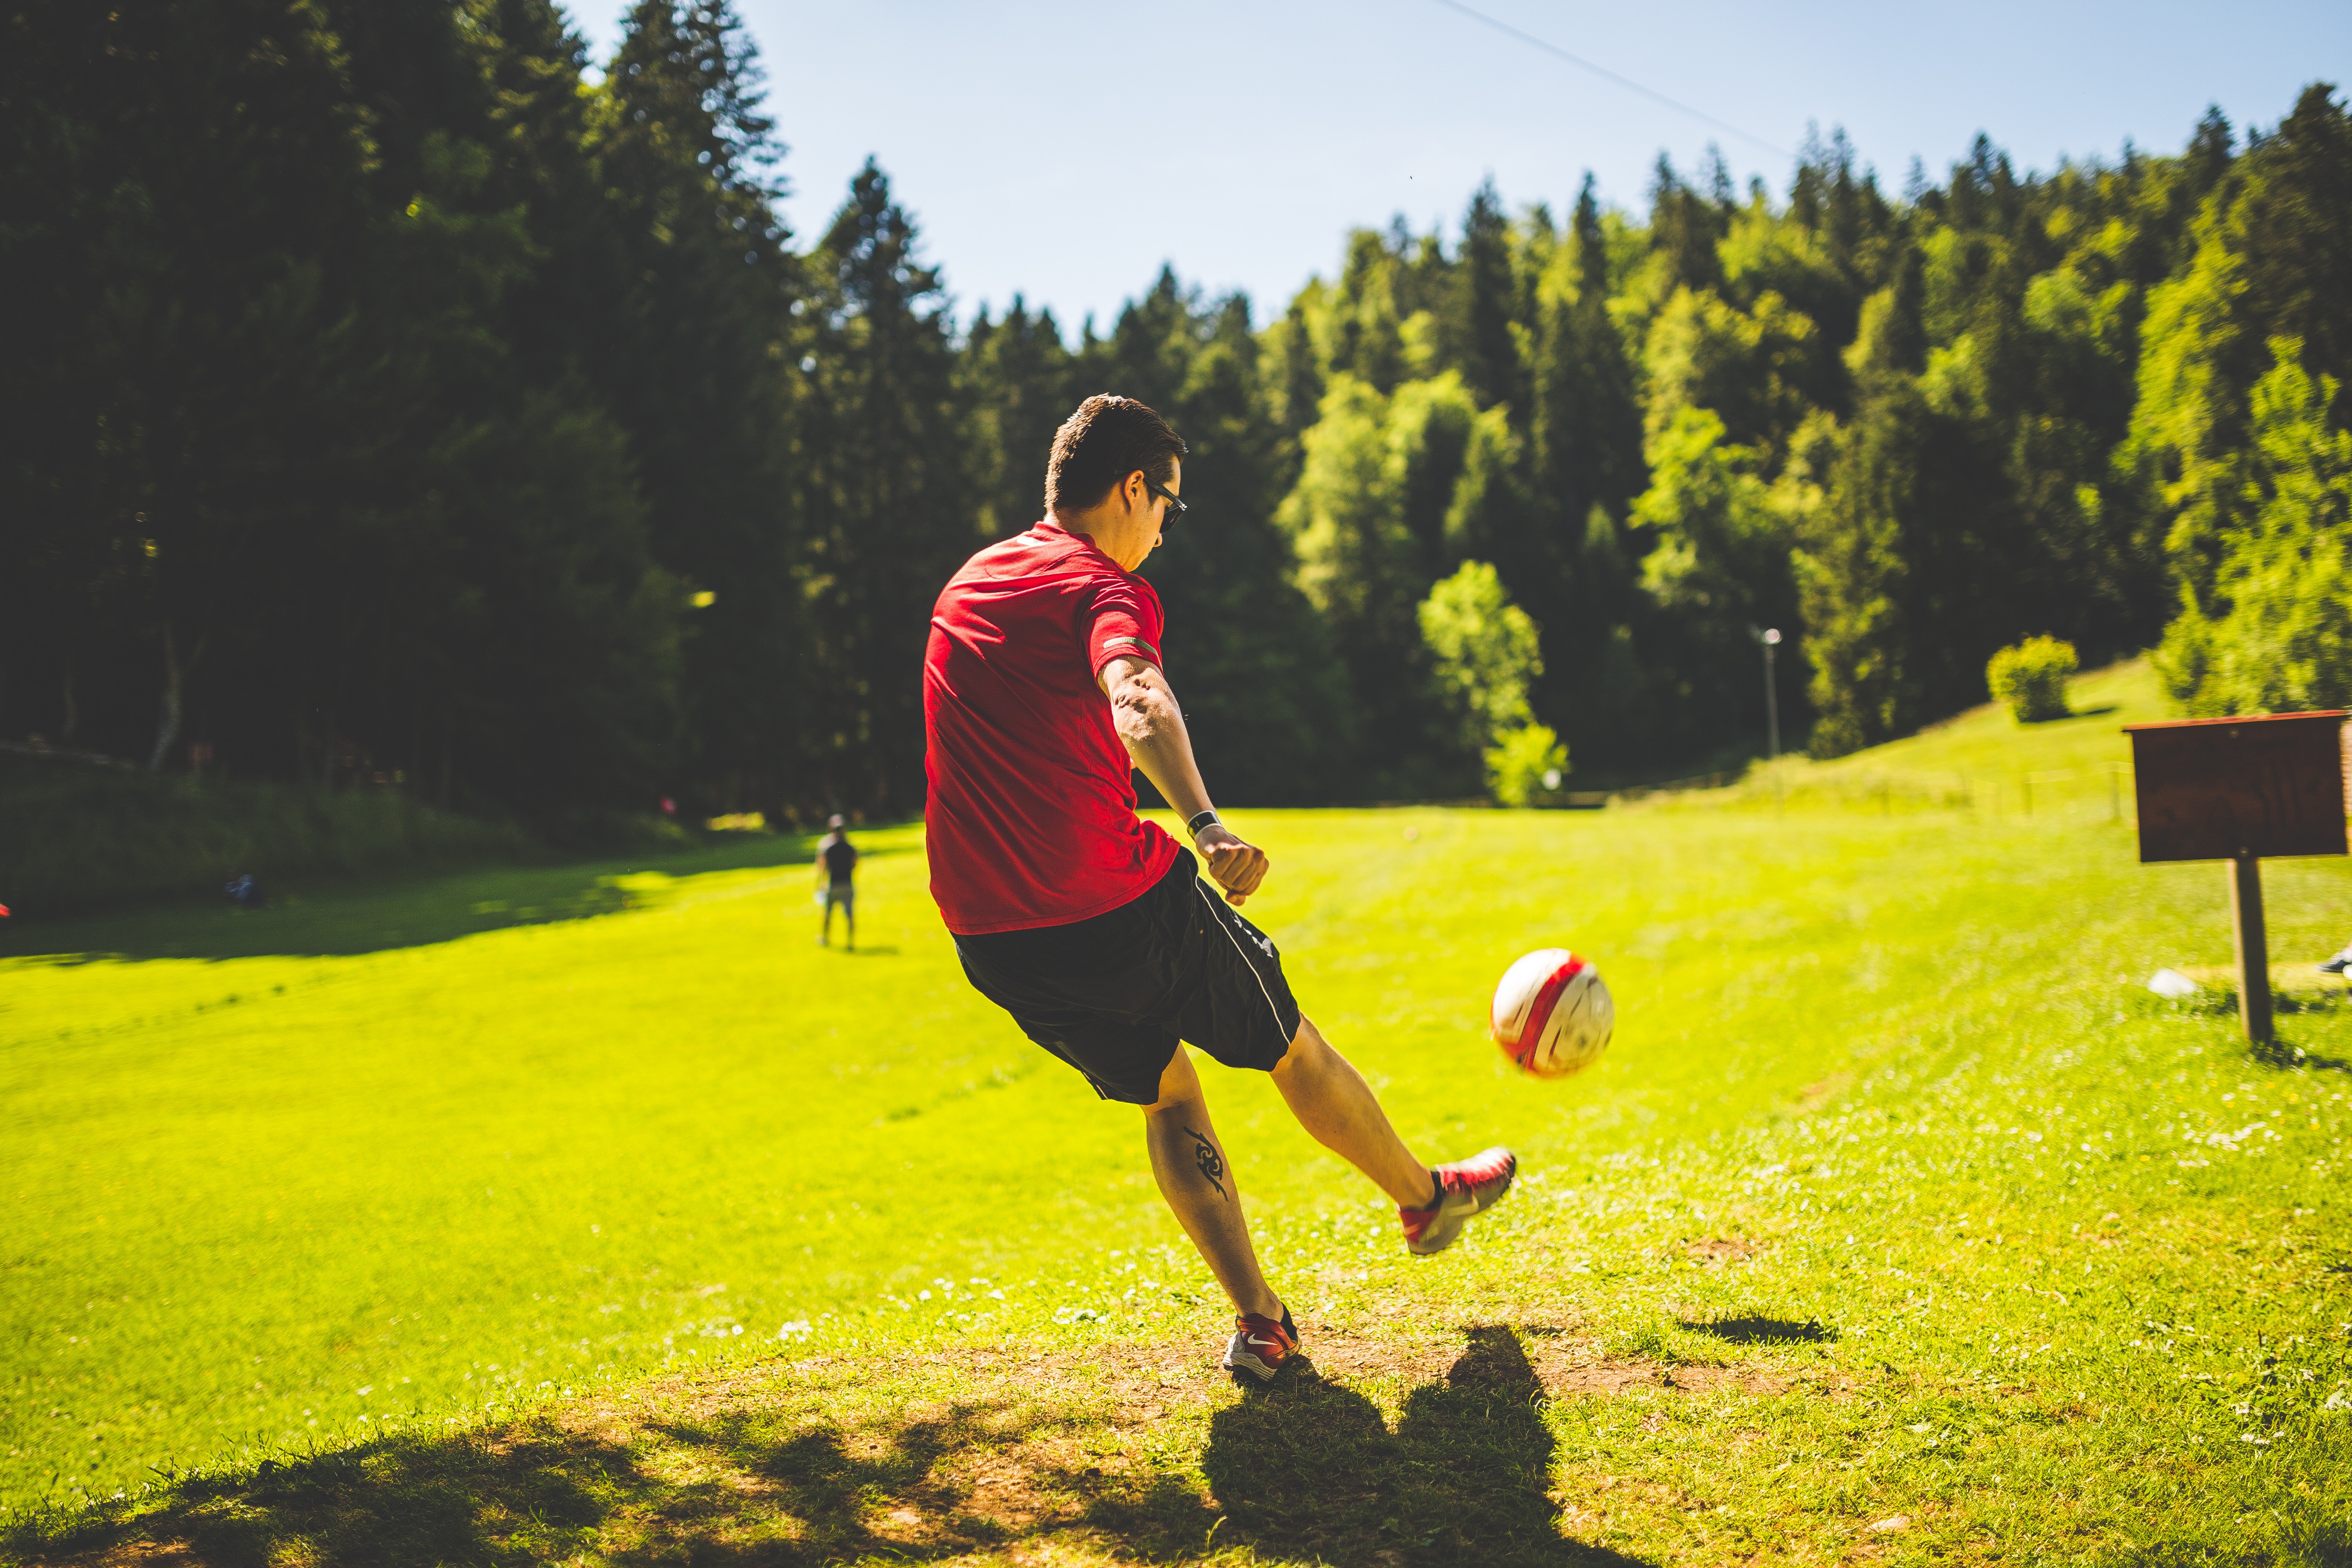 Man in Red T Shirt Playing Soccer during Daytime, Ball, Football, Game, Park, HQ Photo